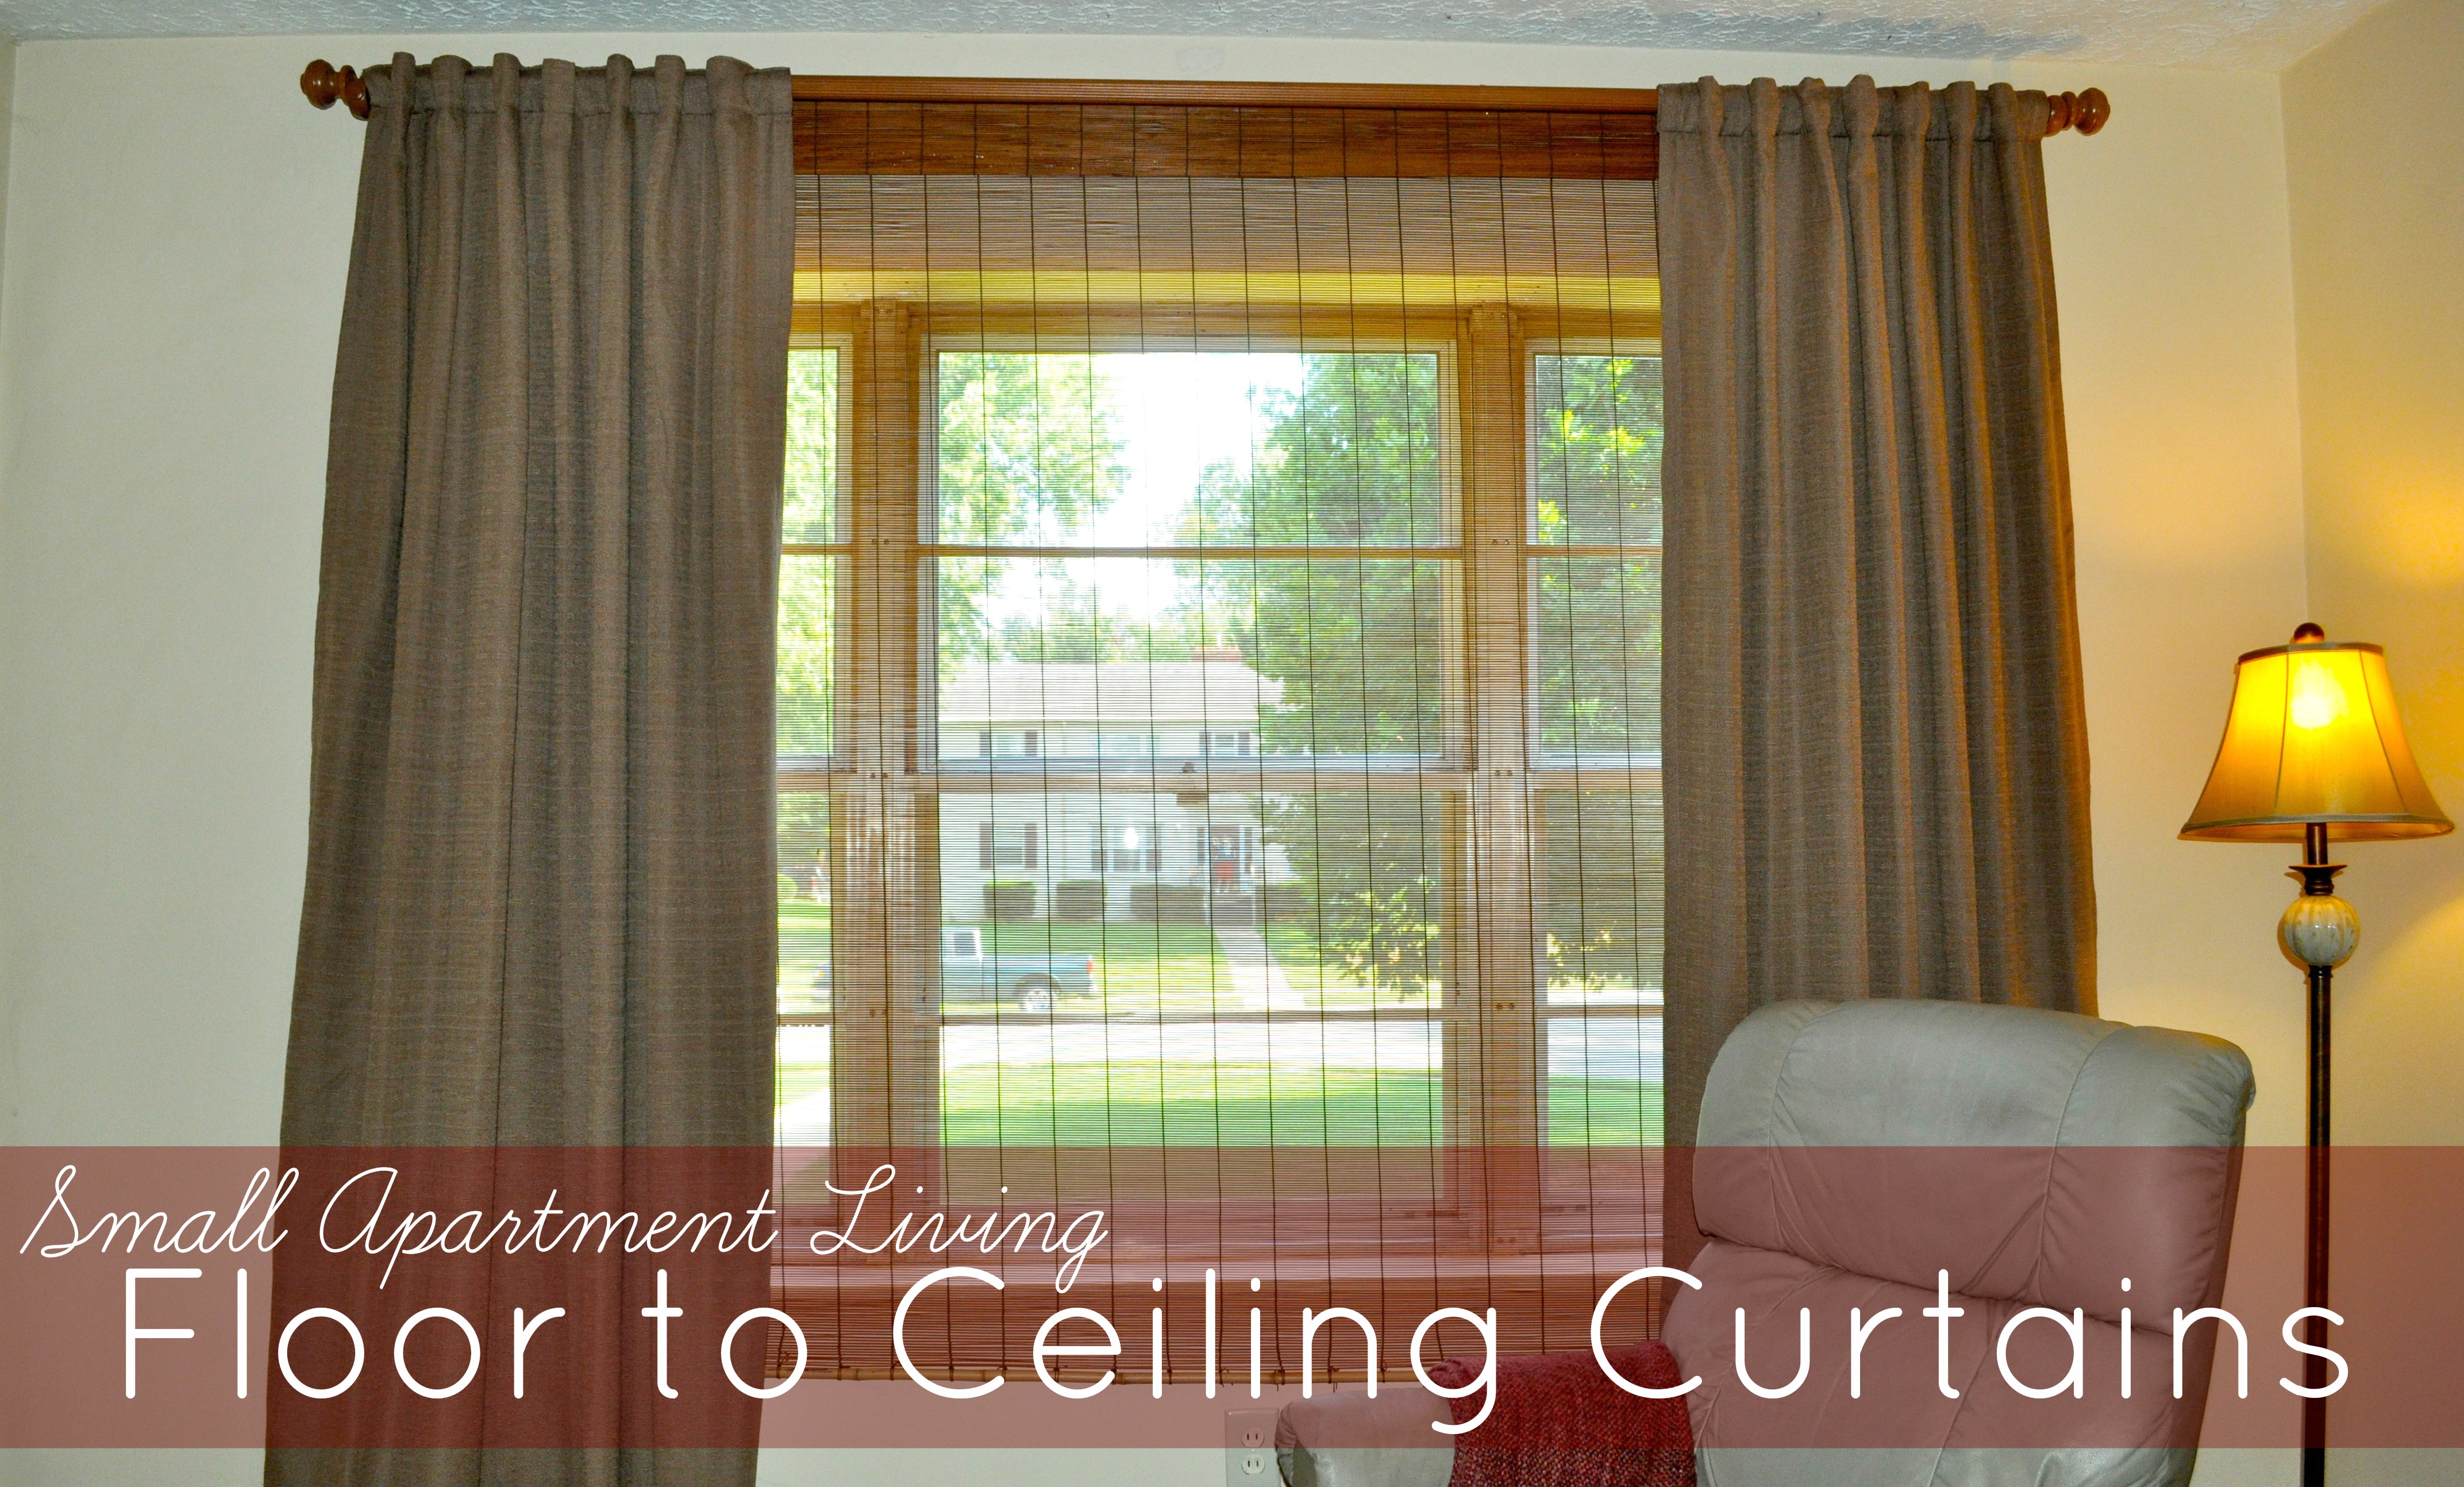 Hanging Curtains From Ceiling To Floor How High to Hang Curtains